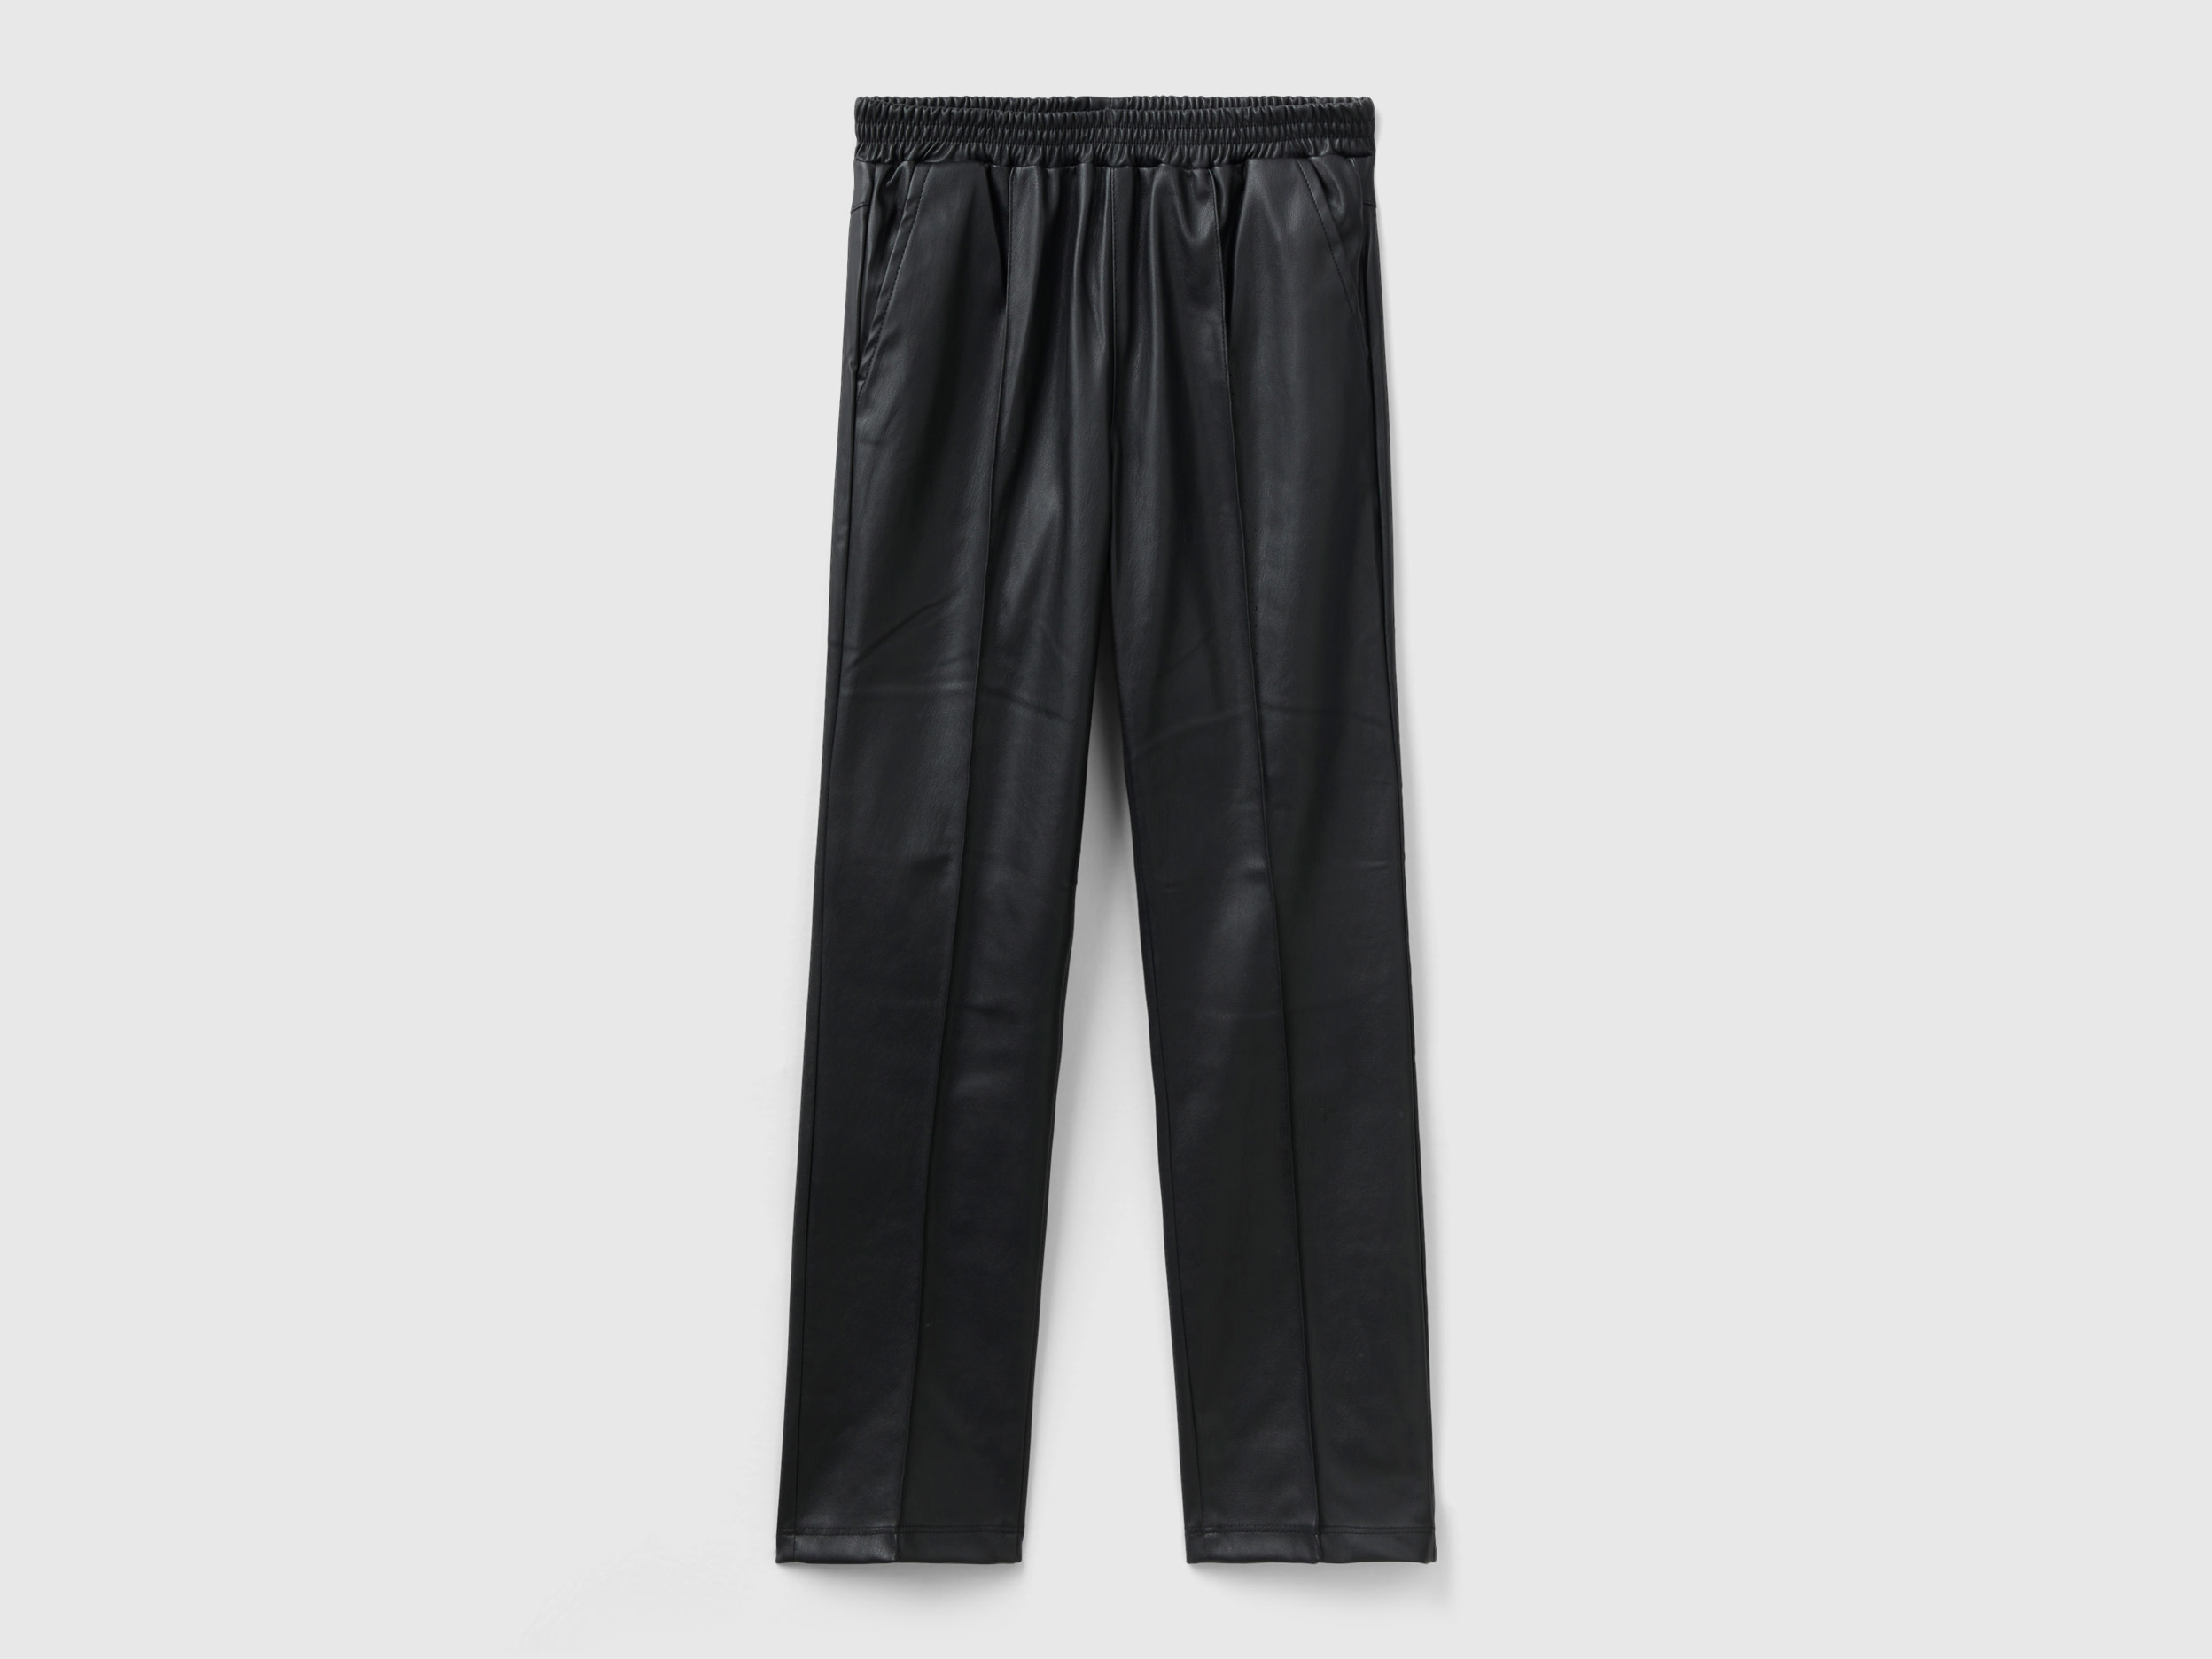 Benetton, Slim Fit Trousers In Imitation Leather Fabric, size M, Black, Kids